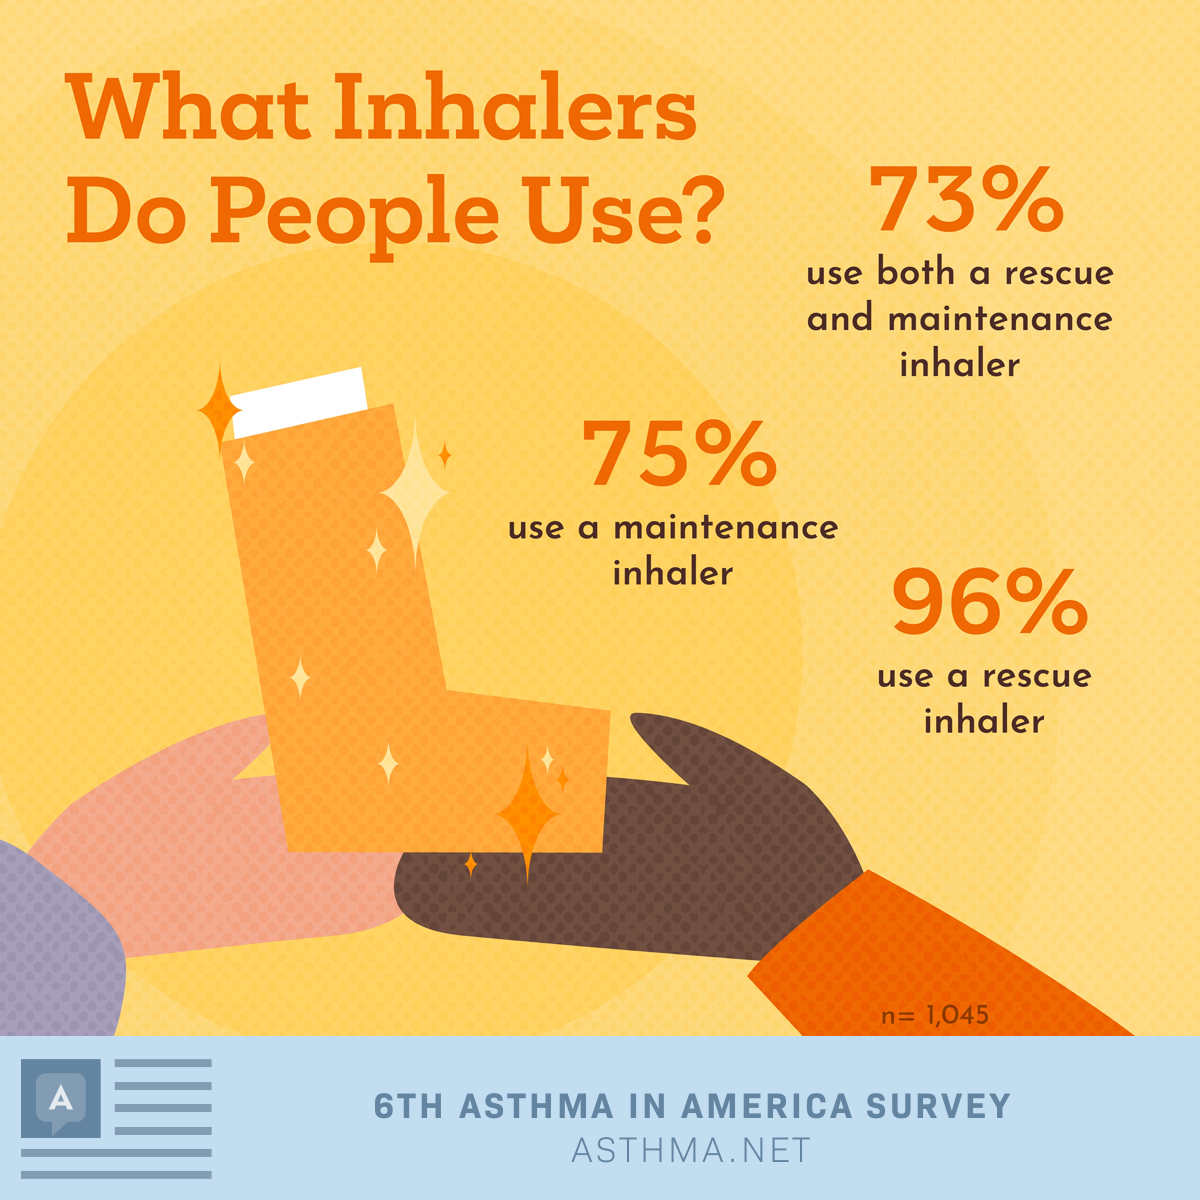 96% use rescue inhalers, 75% use maintenance inhalers, and 73% use both.